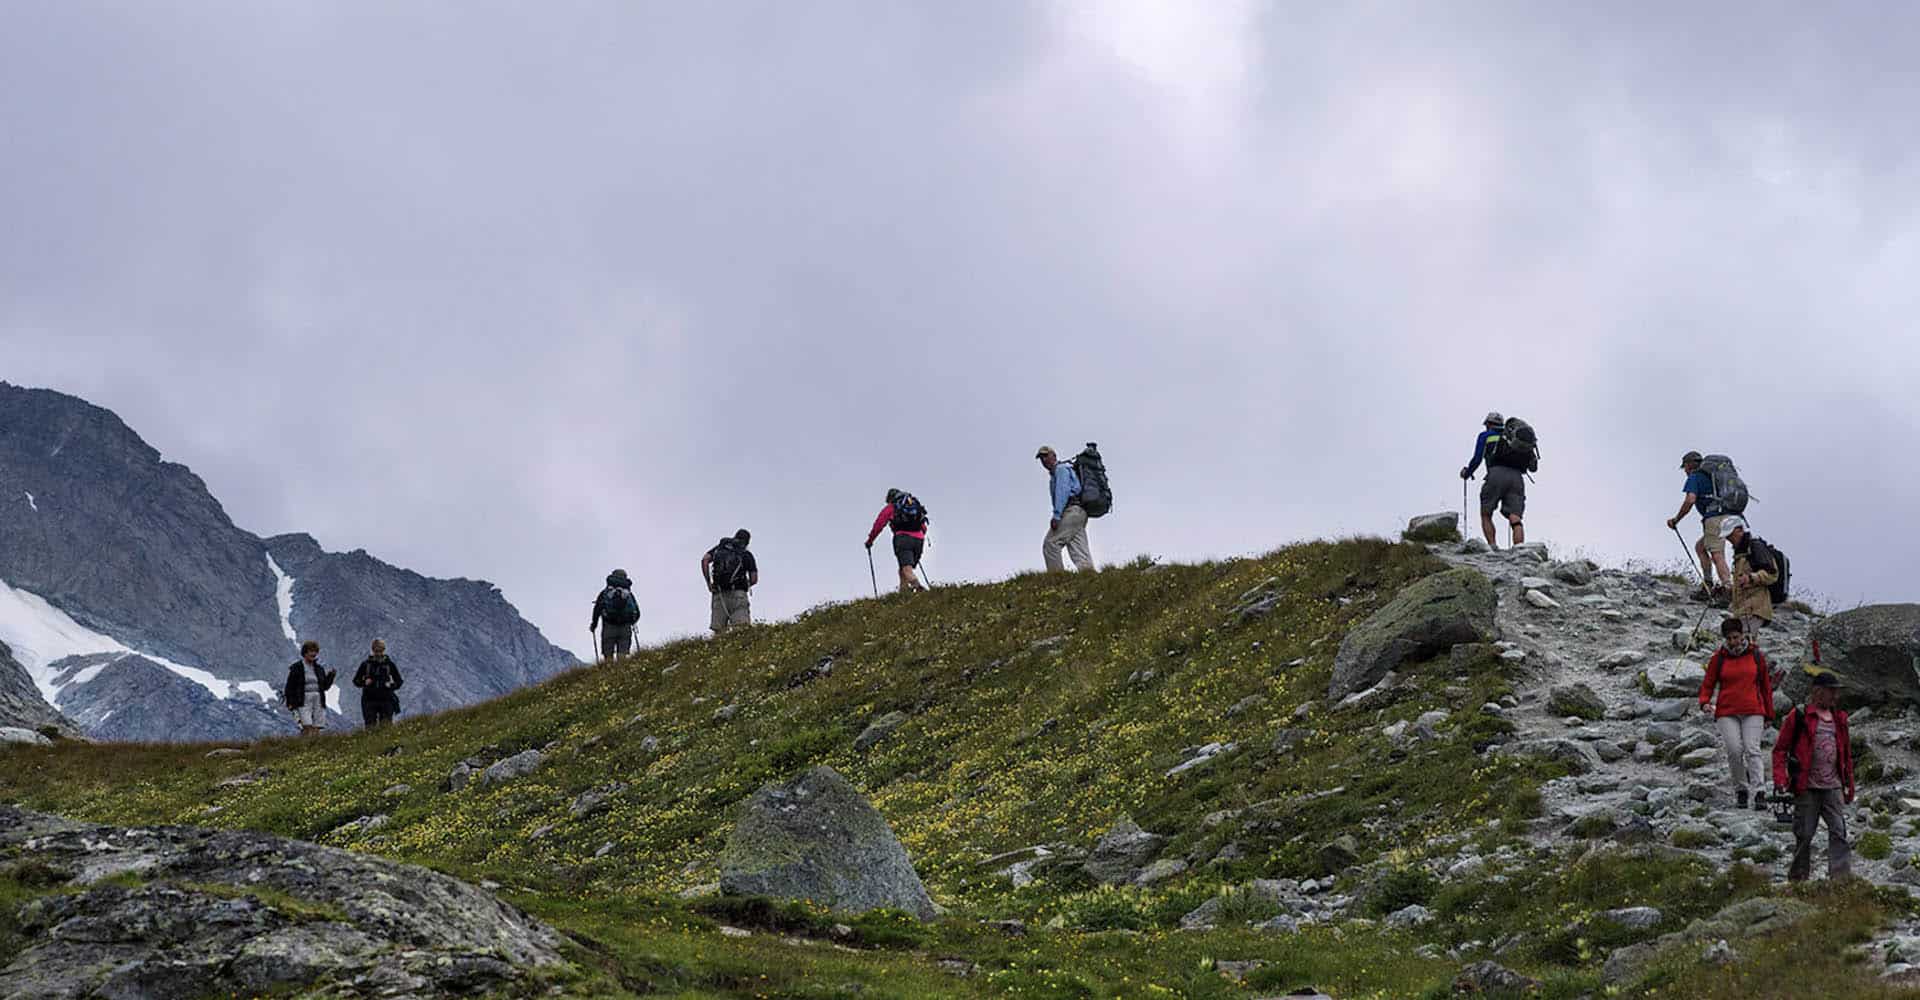 hikers on the Haute Route near Moiry, Switzerland